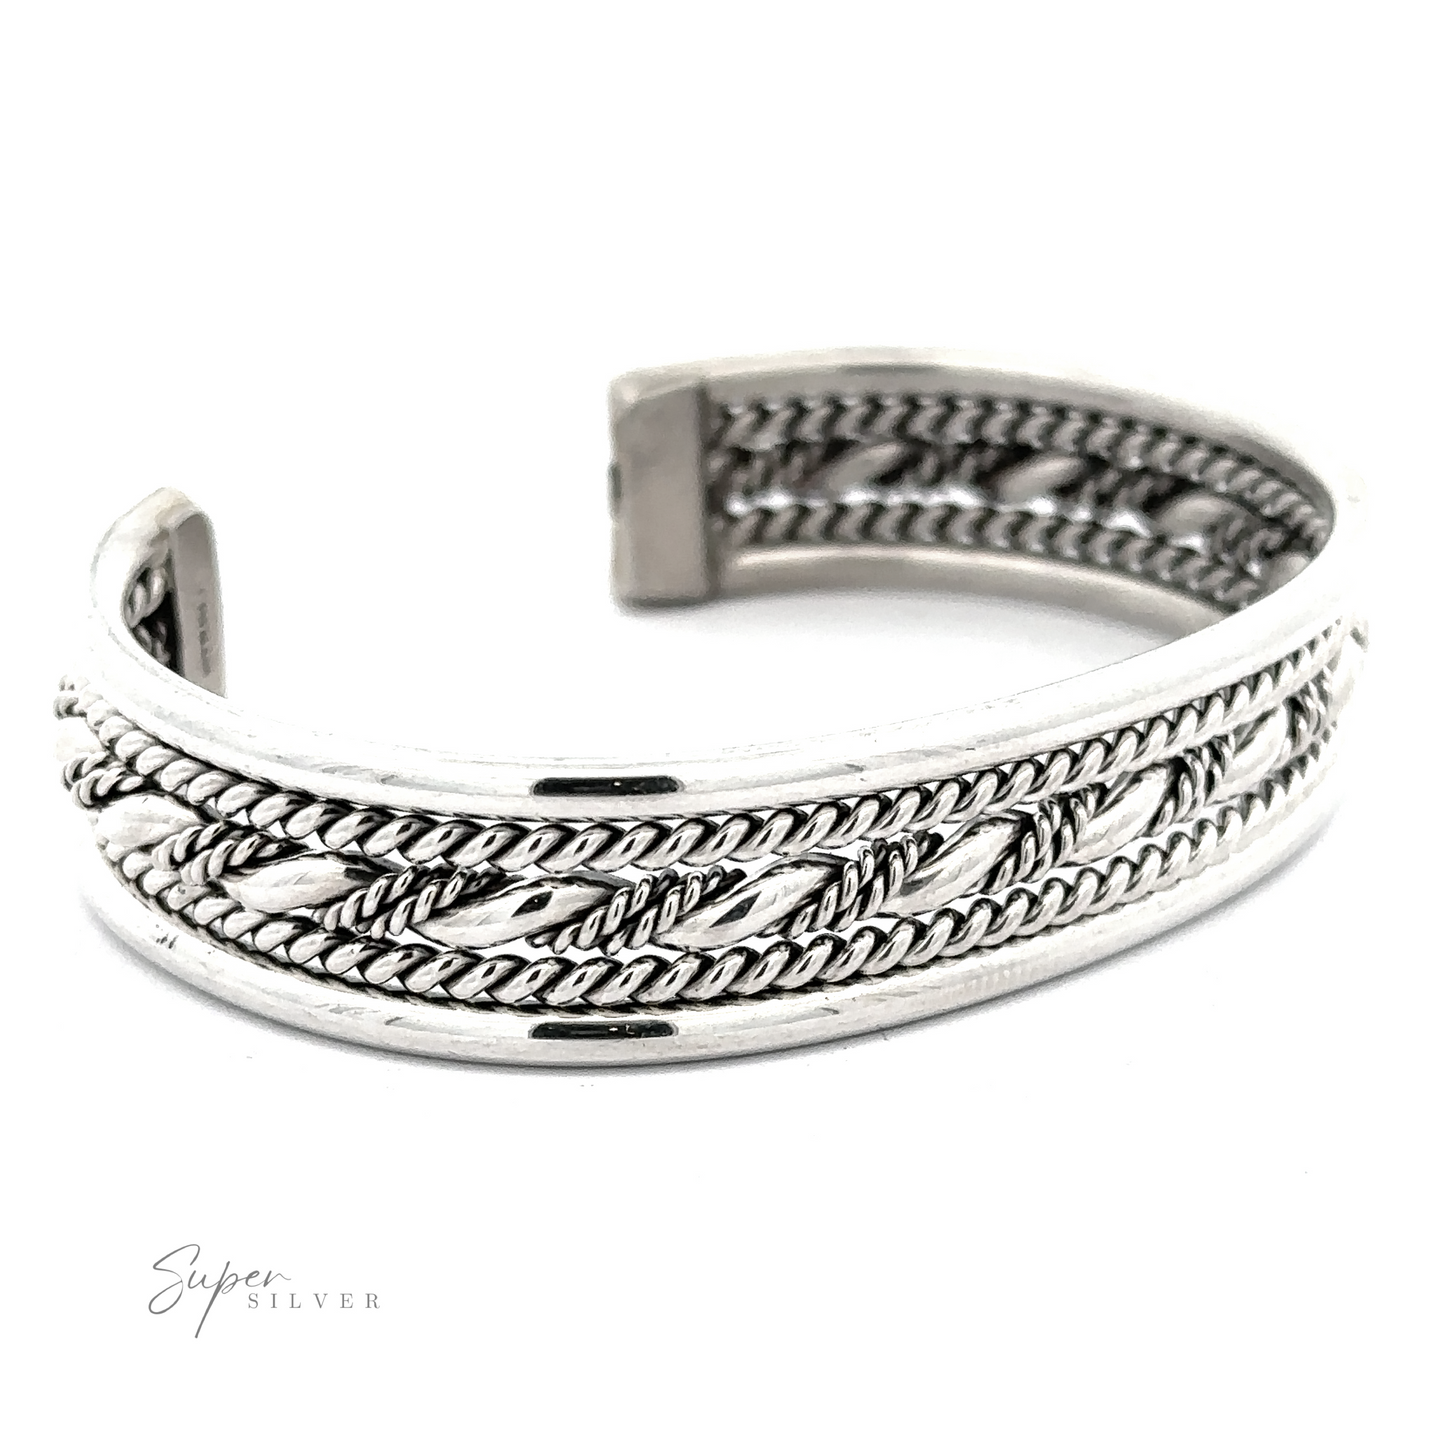 A silver cuff bracelet featuring a braided rope design and engraved pattern. Crafted in .925 Sterling Silver, the Native American Handmade Intricate Silver Cuff is partially open and has a polished finish, with the text "Super Silver" visible in the corner. The 11mm width adds to its elegant presence.